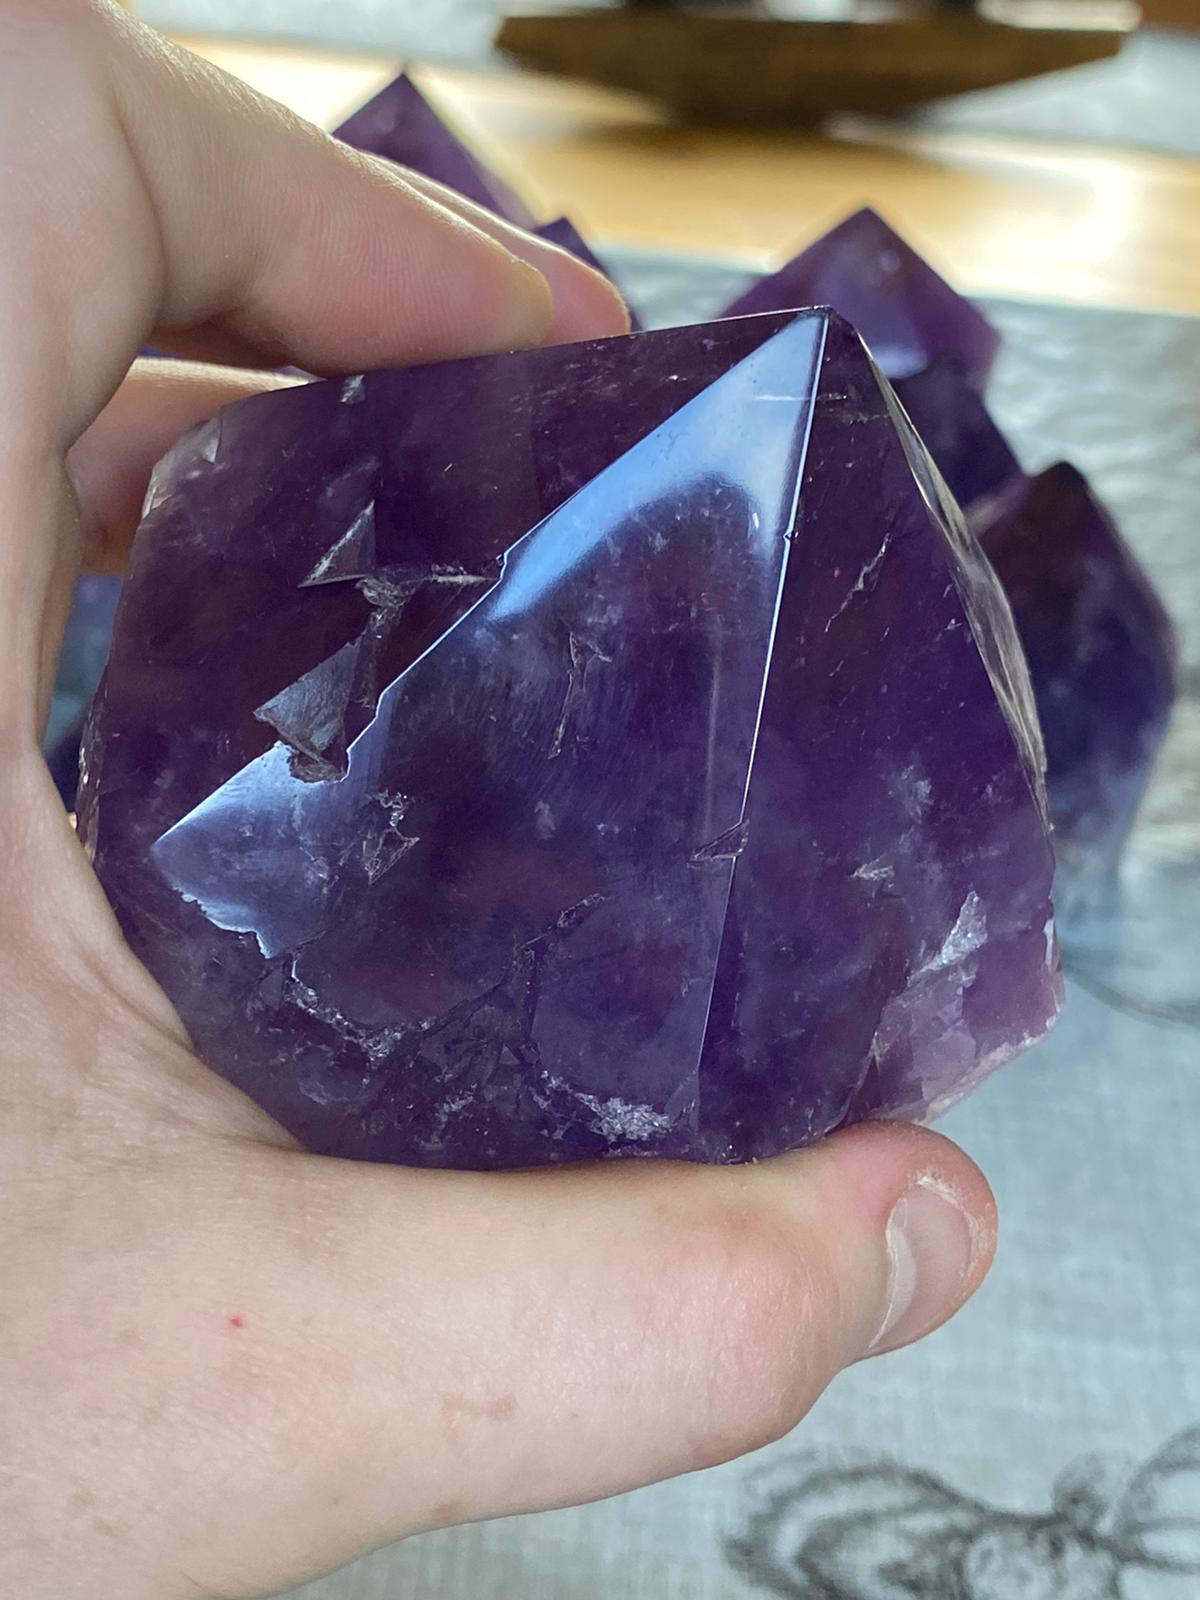 4Kilo Big Cluster of Amethyst Crystals from Bolivia - Mineral Mike